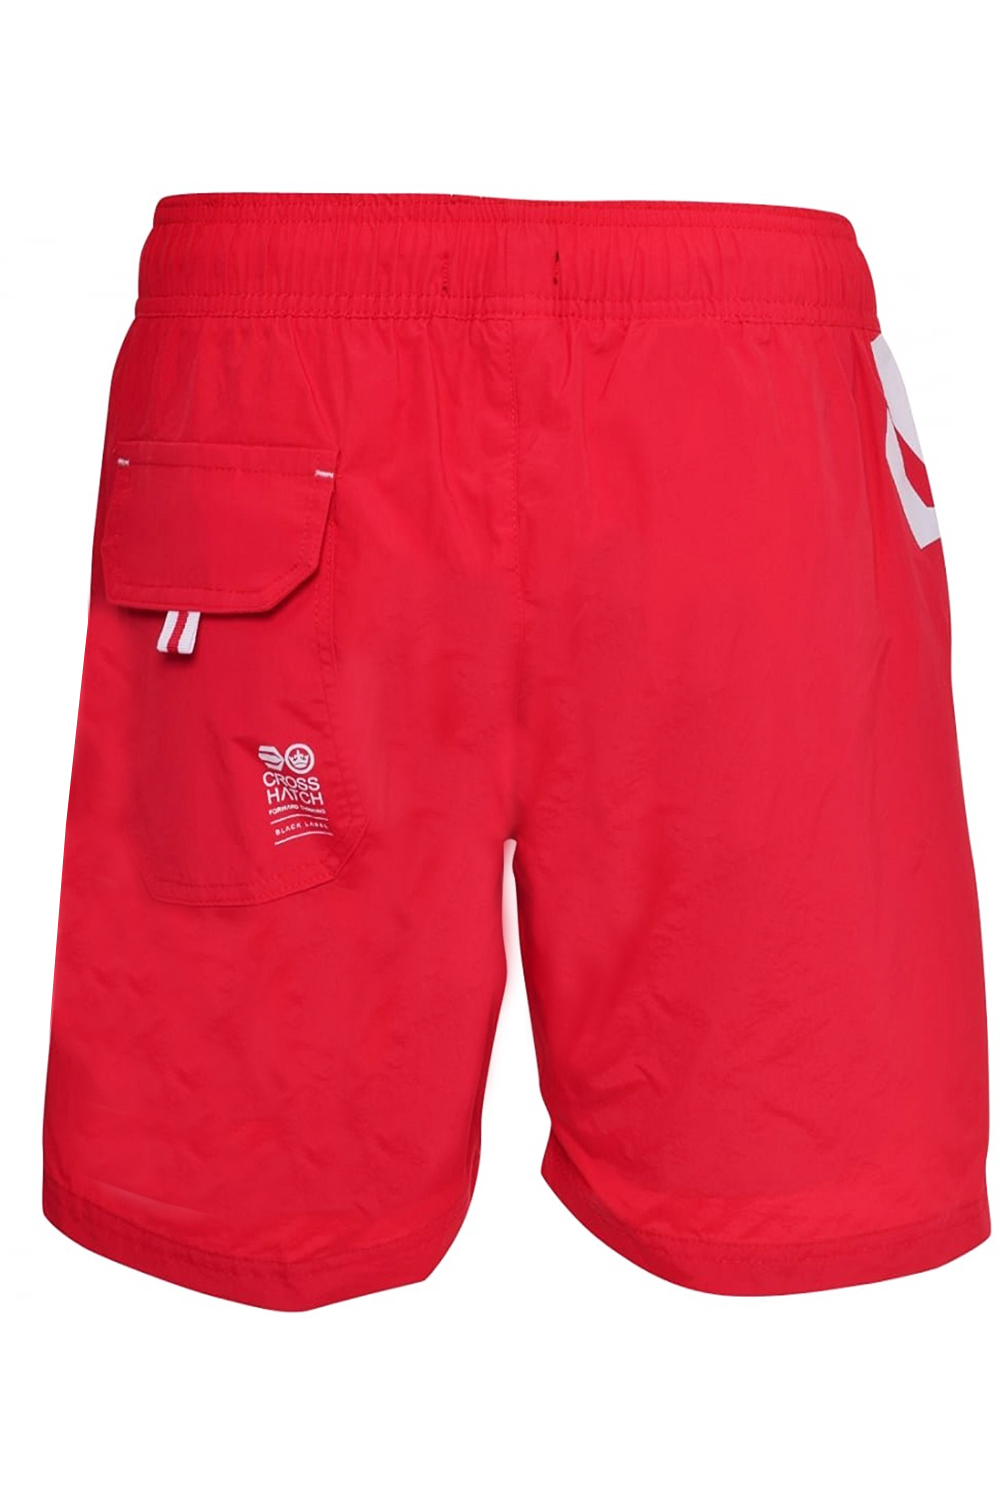 Crosshatch Mens Pacific High Red Swim Shorts Mesh Lined Swimming Trunks ...